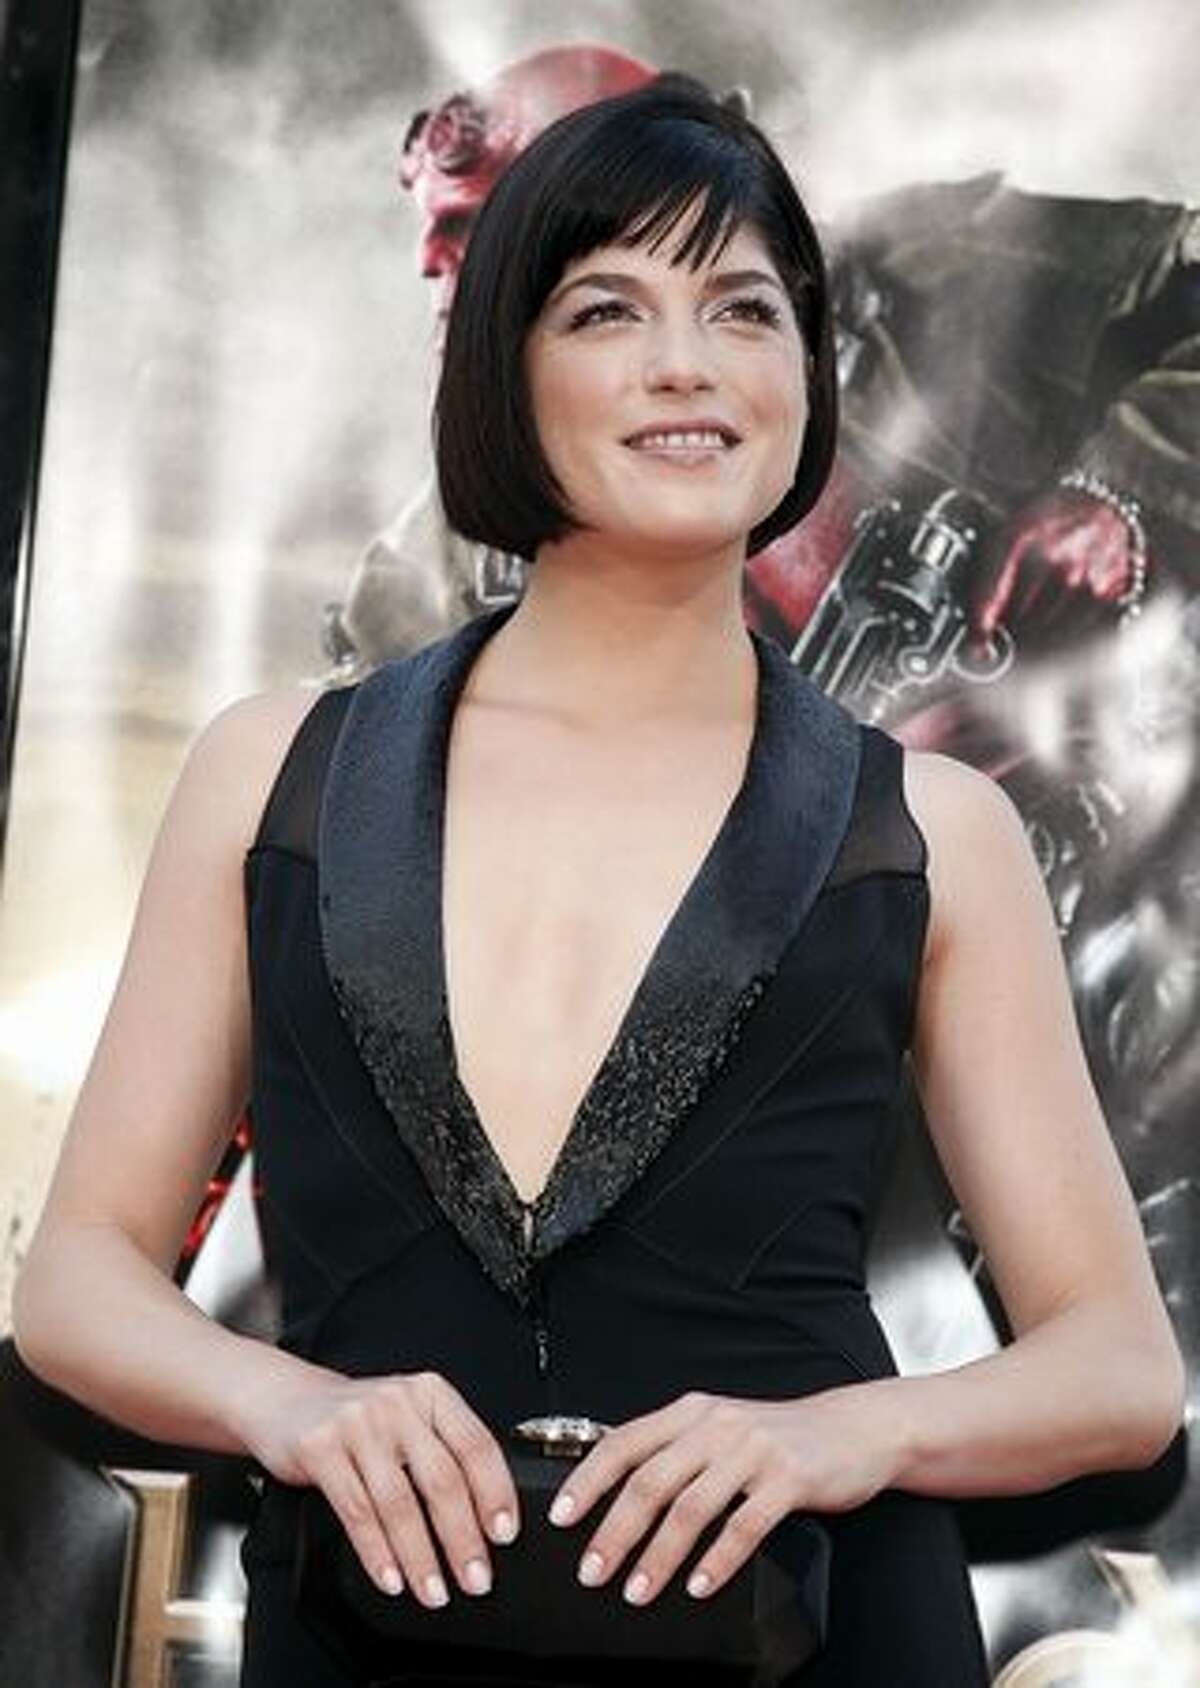 Actress Selma Blair arrives at the world premiere of "Hellboy II: The Golden Army."